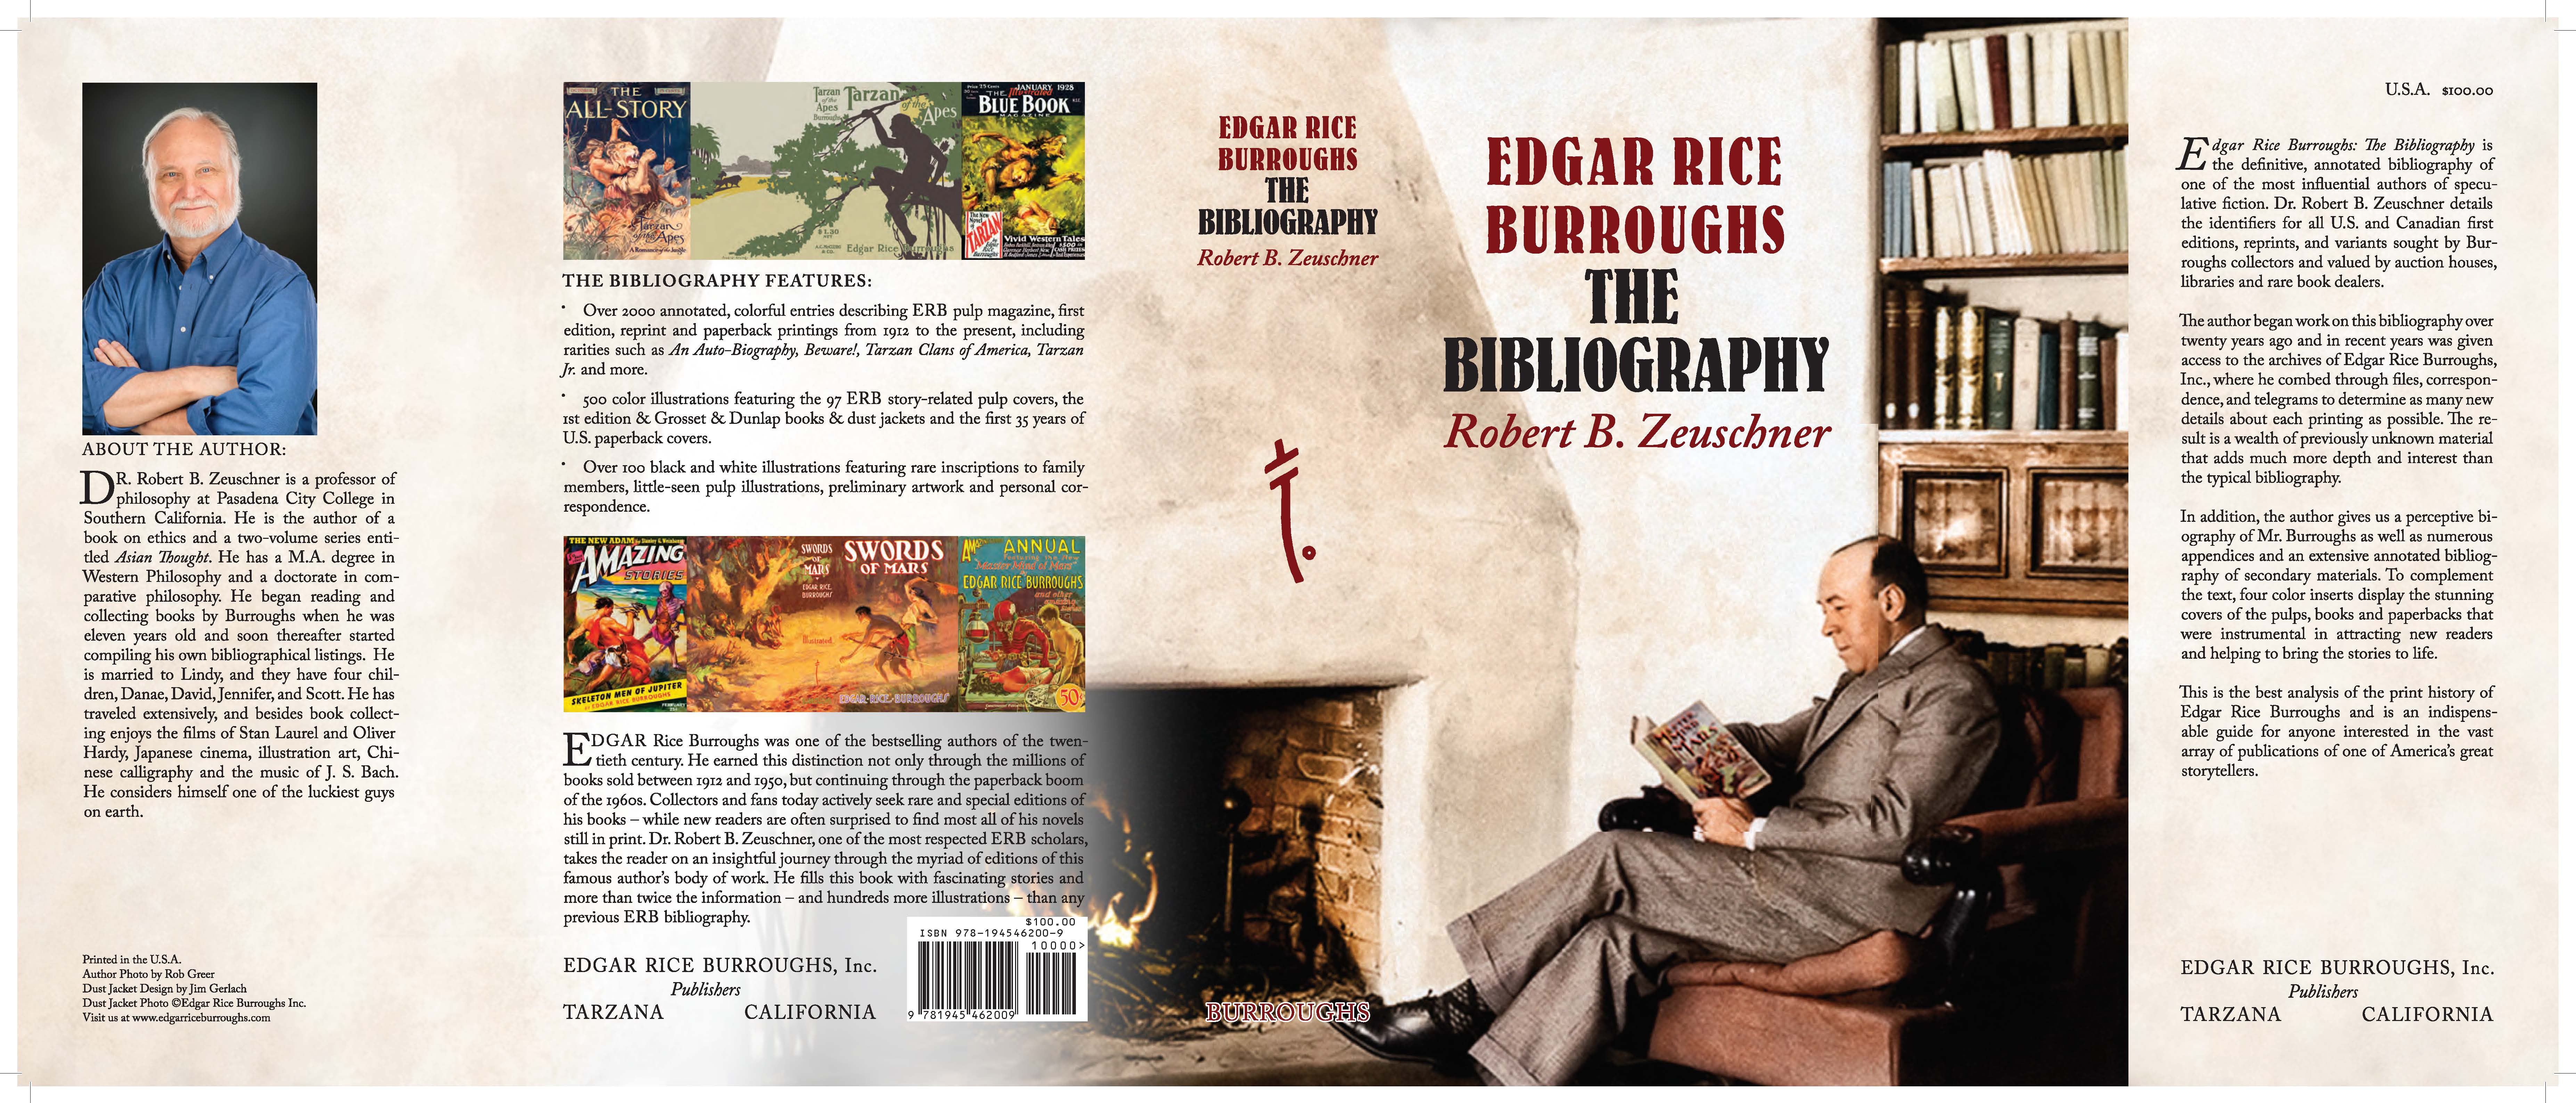 Full Dust Jacket for the Standard Edition